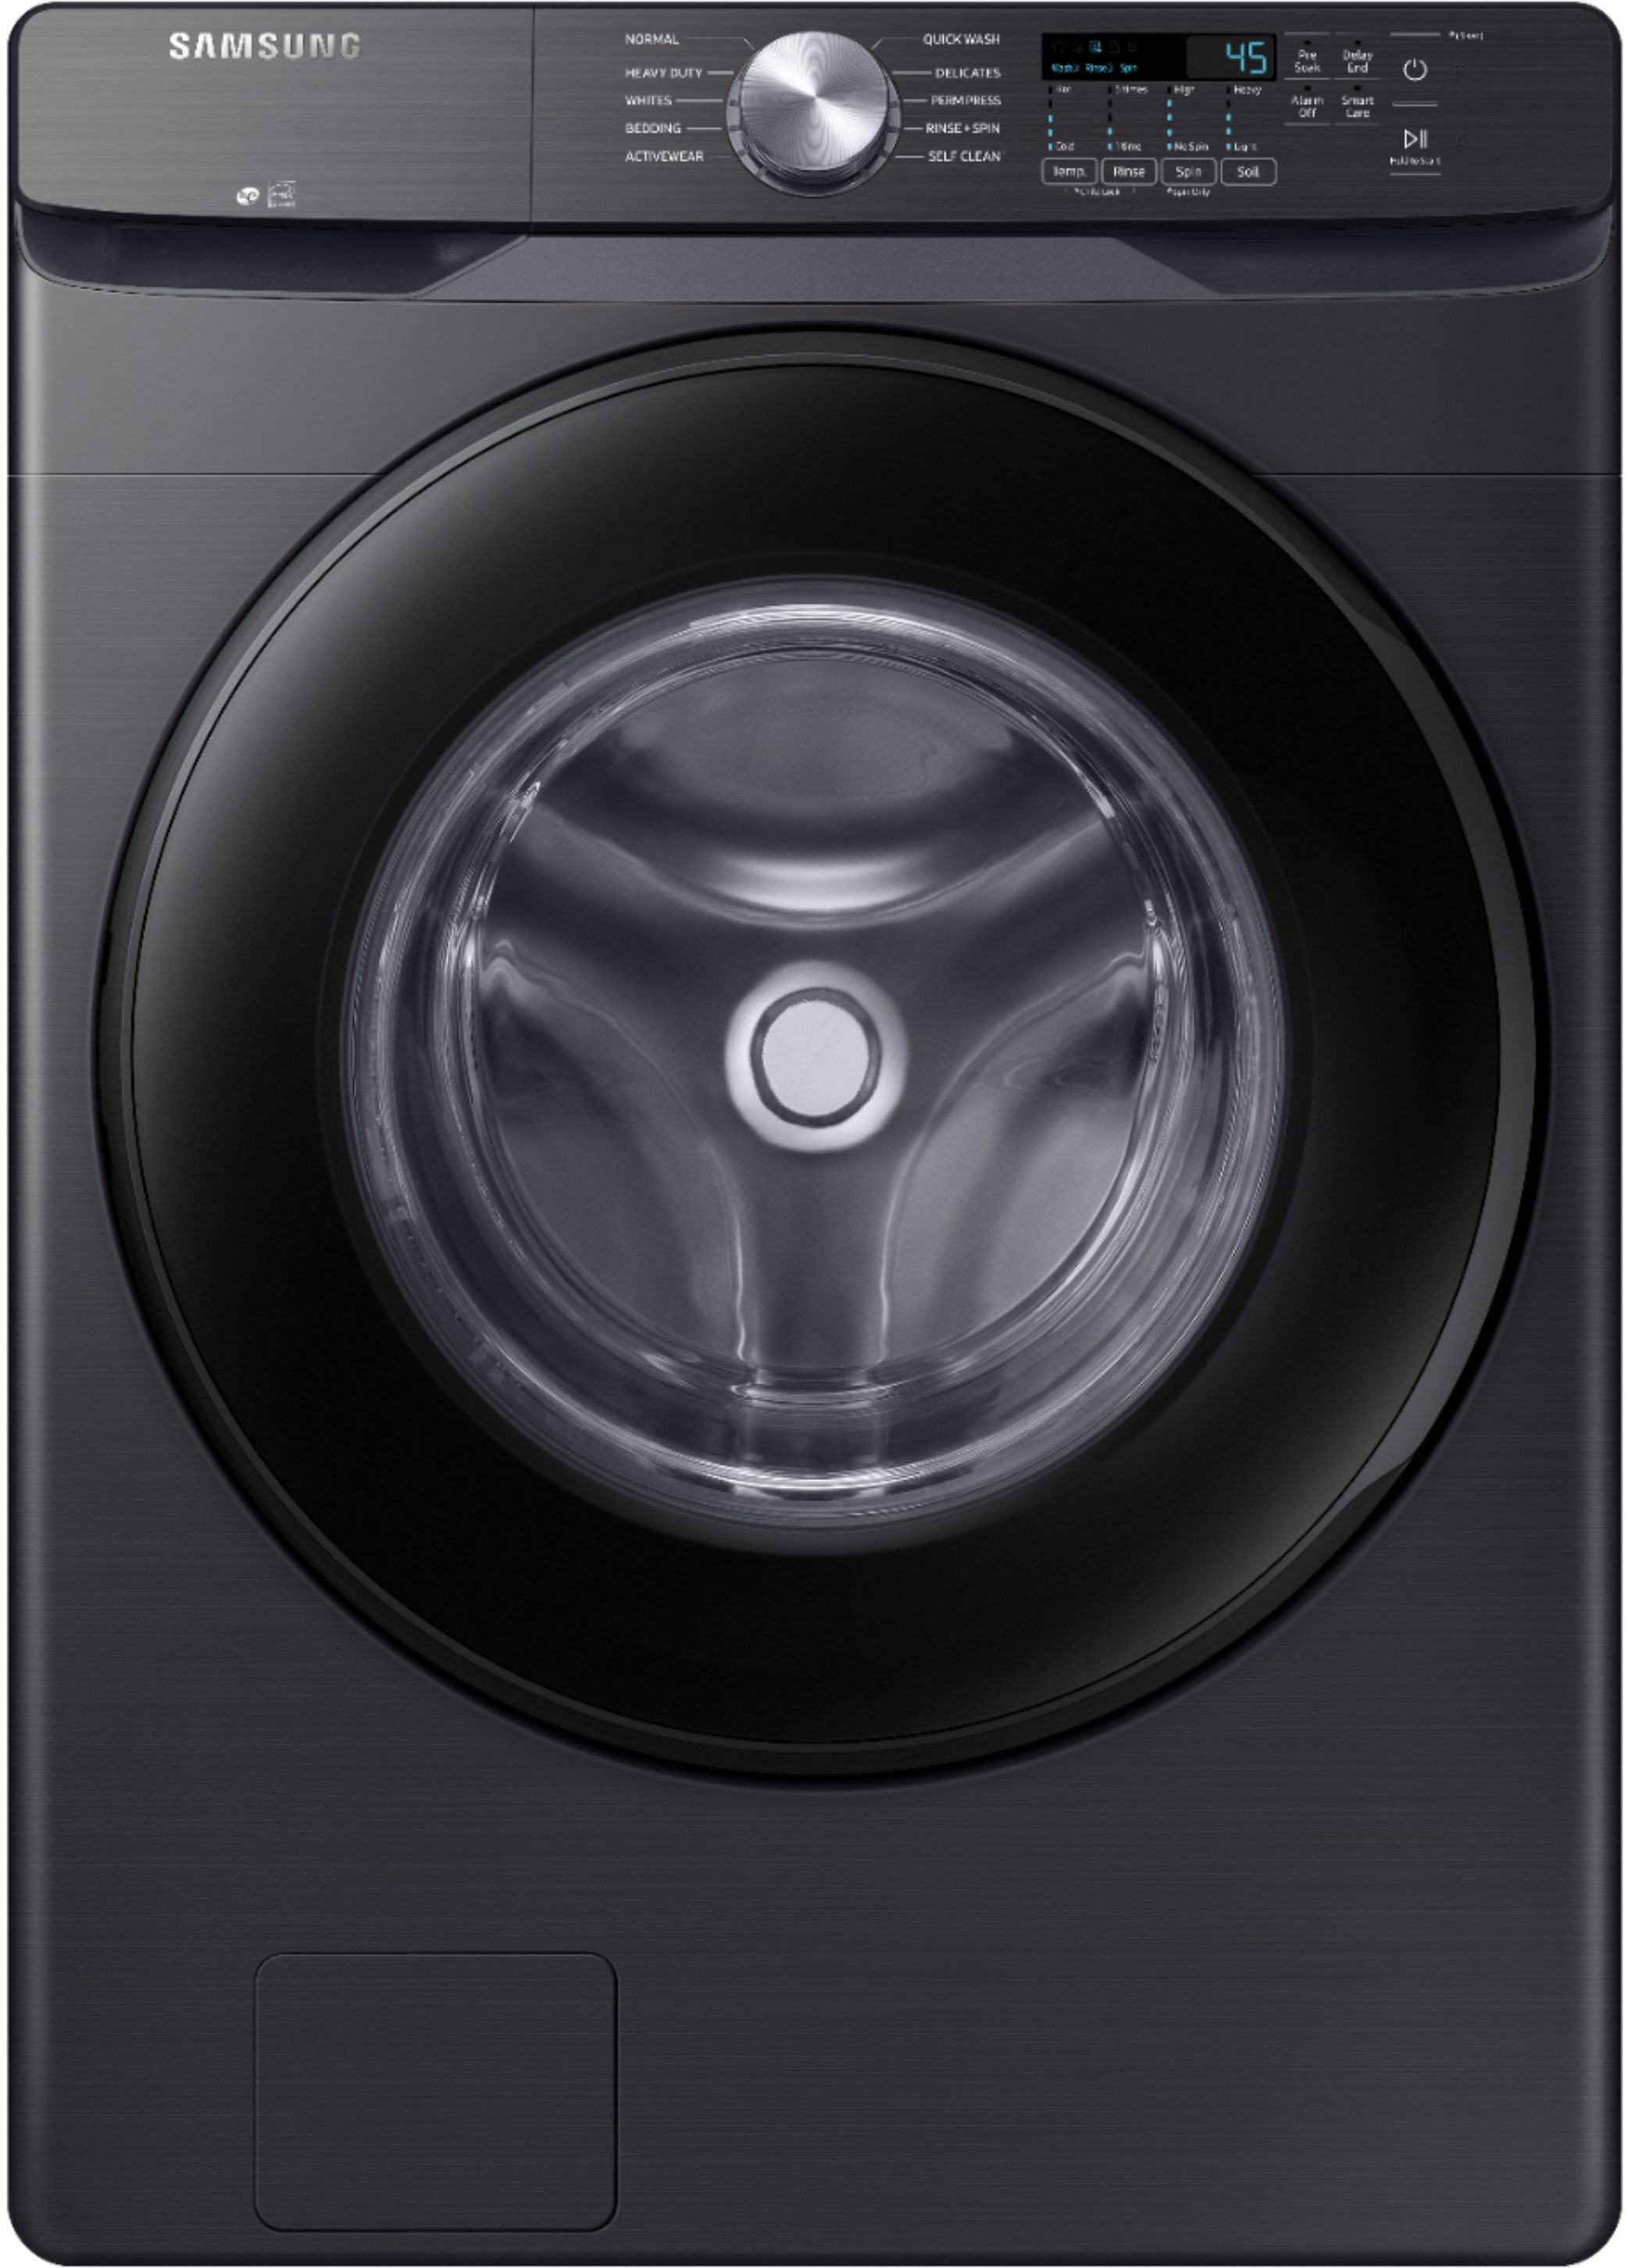 Samsung - 4.5 Cu. Ft. High Efficiency Stackable Smart Front Load Washer with Vibration Reduction Technology+ - Black Stainless Steel